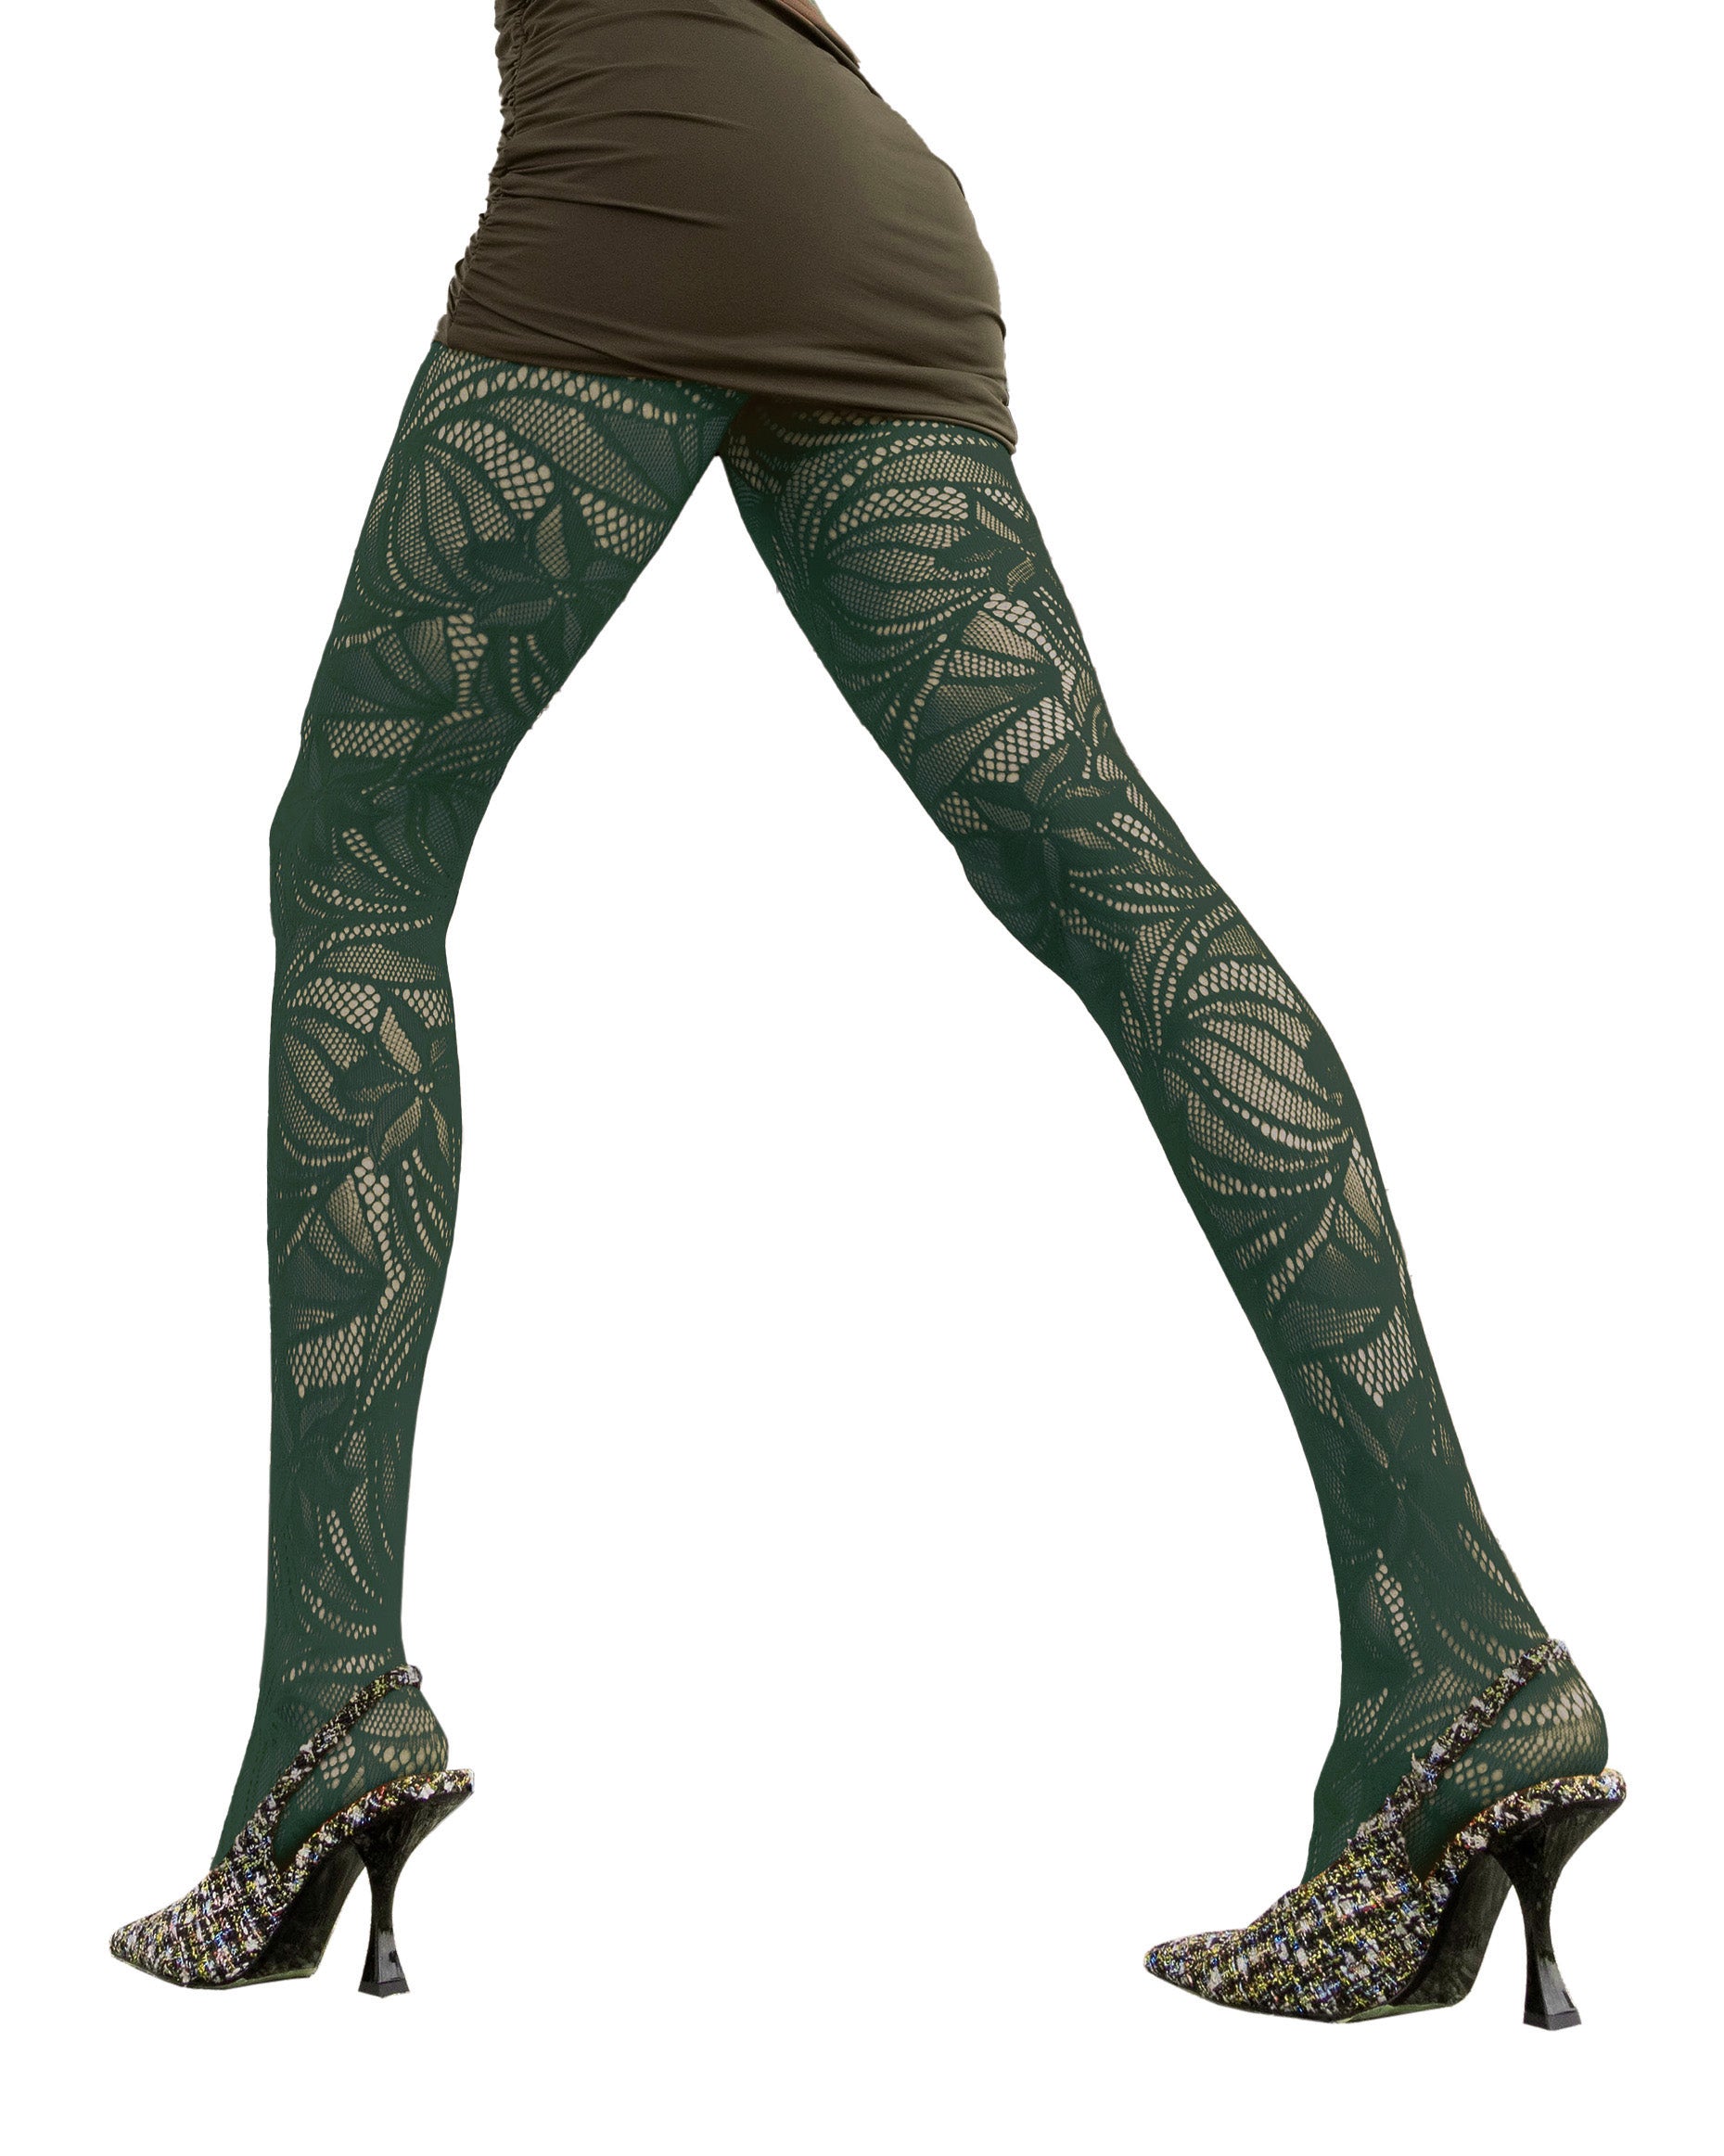 Trasparenze Il Cairo Collant - Dark green (pino) openwork fashion fishnet tights with a wavy floral leaf lace style pattern.